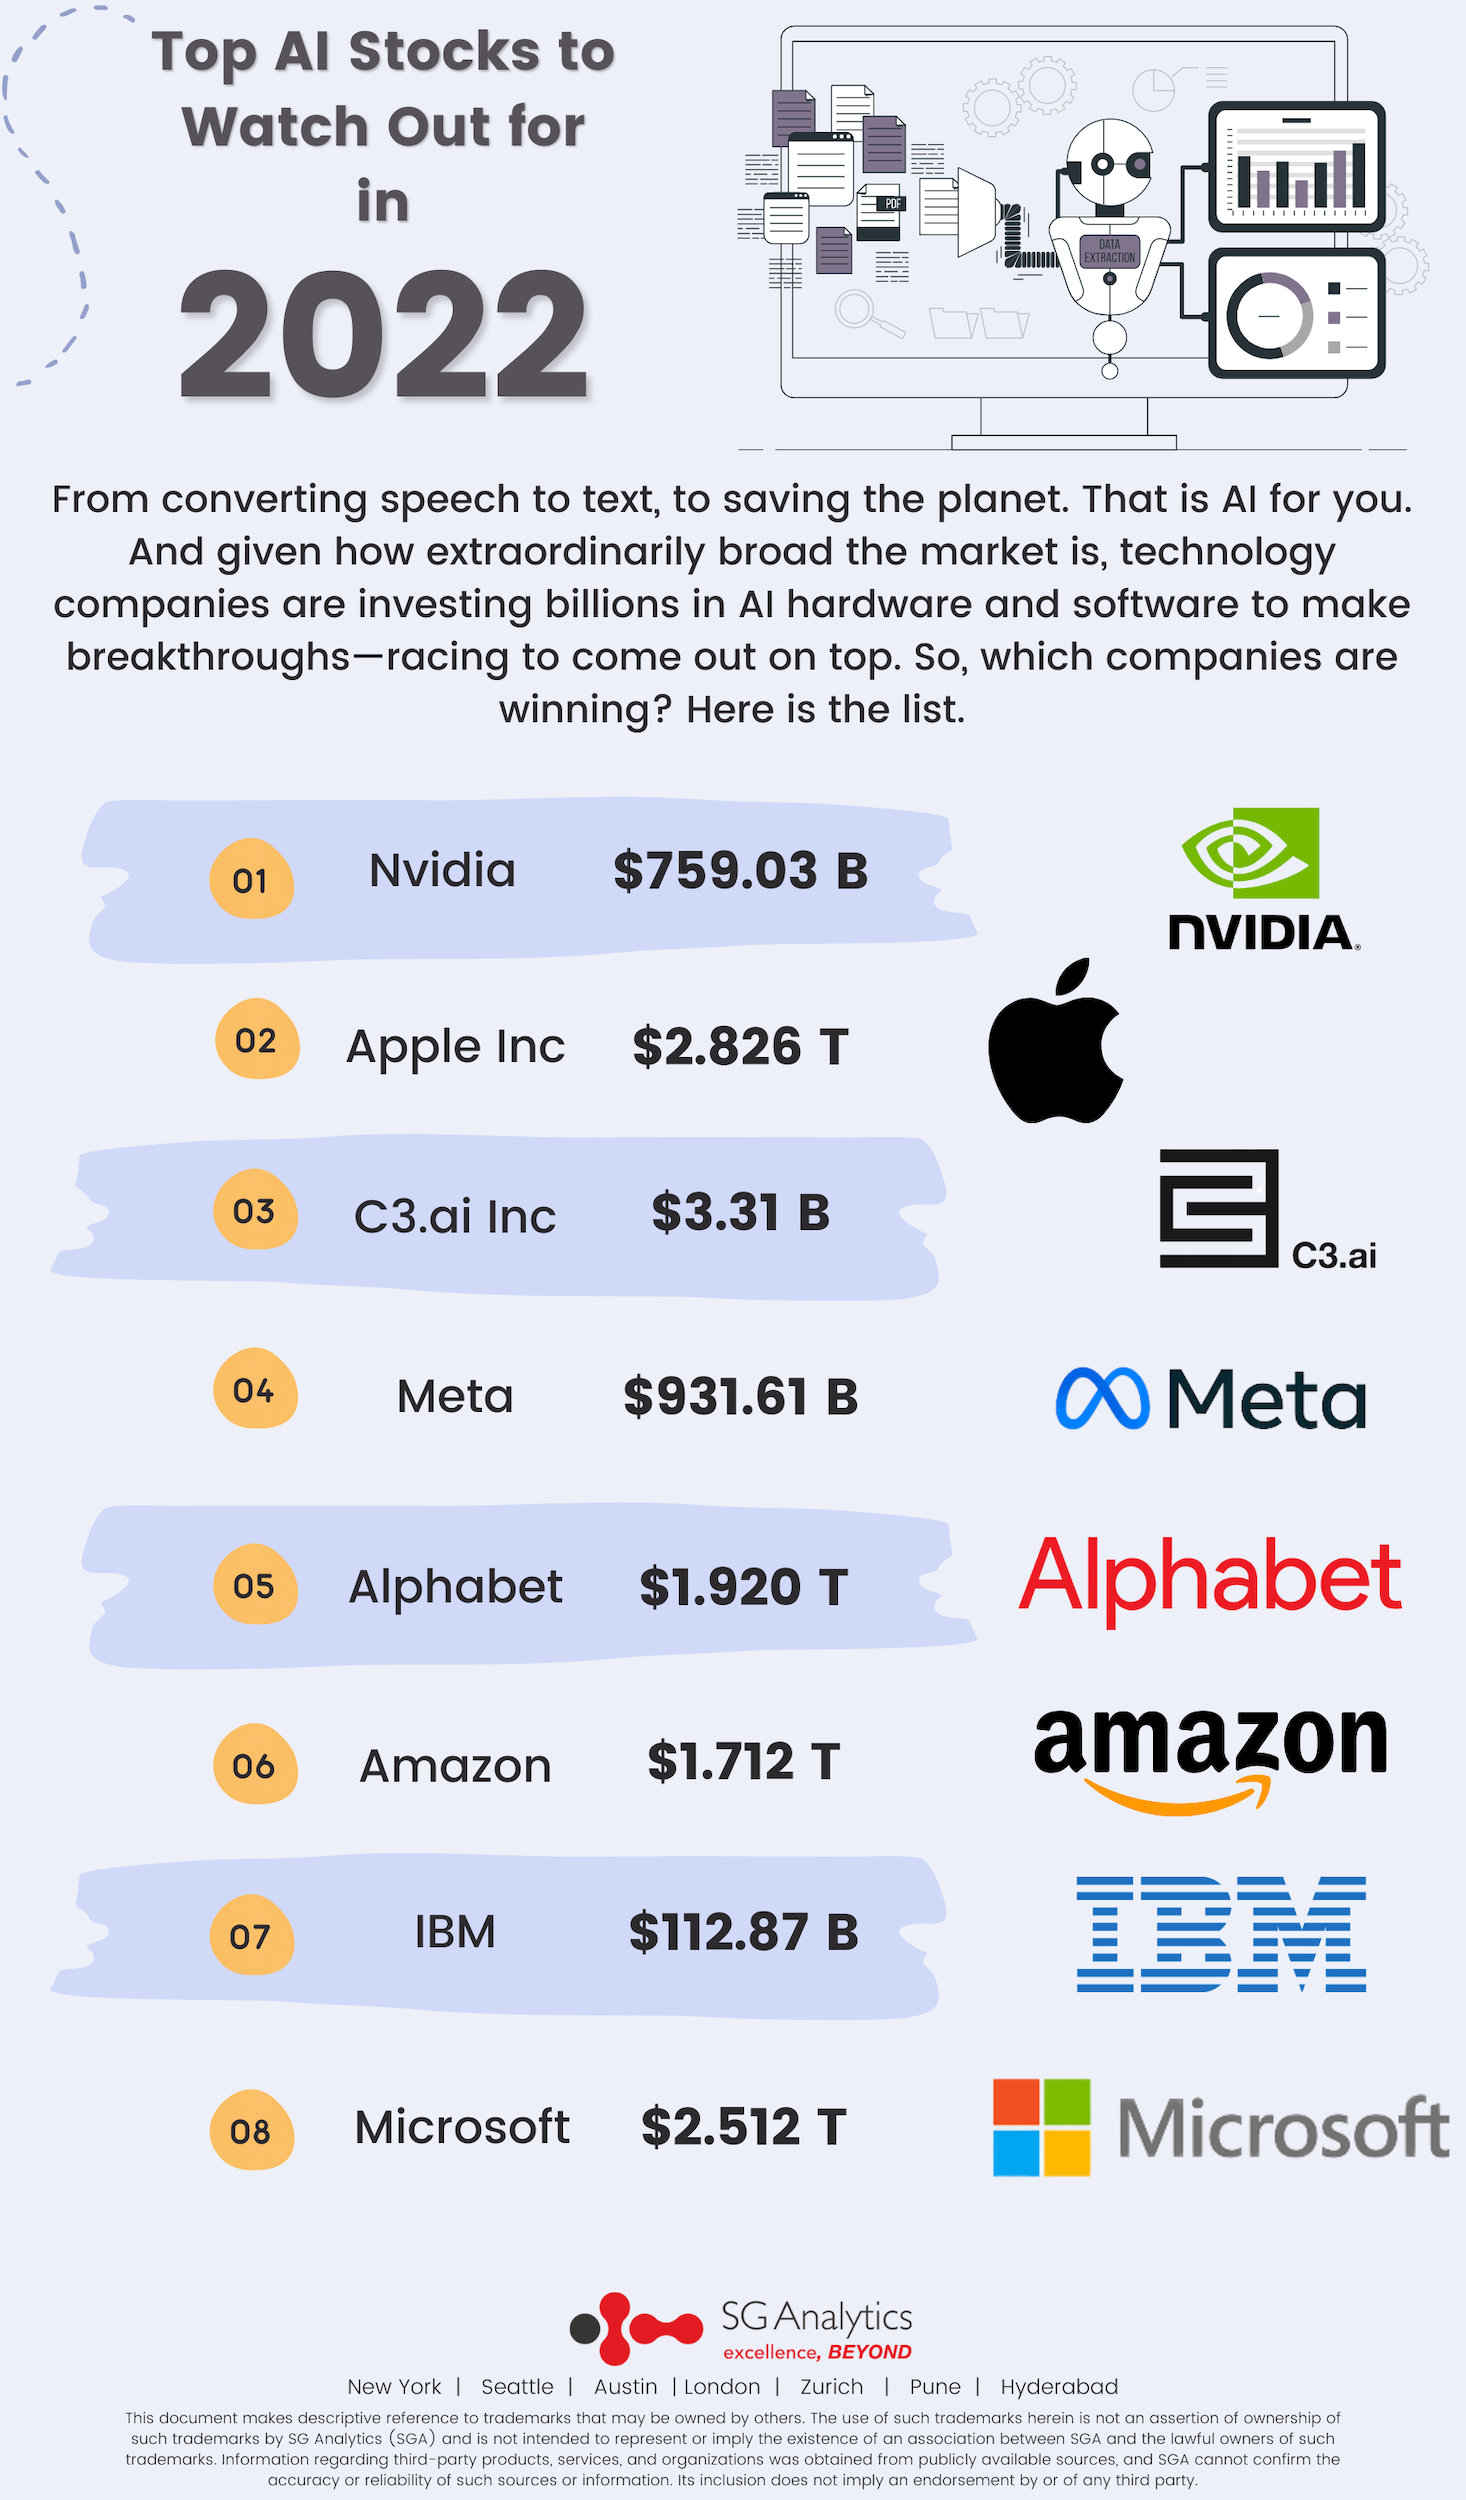 Top AI Stocks to consider